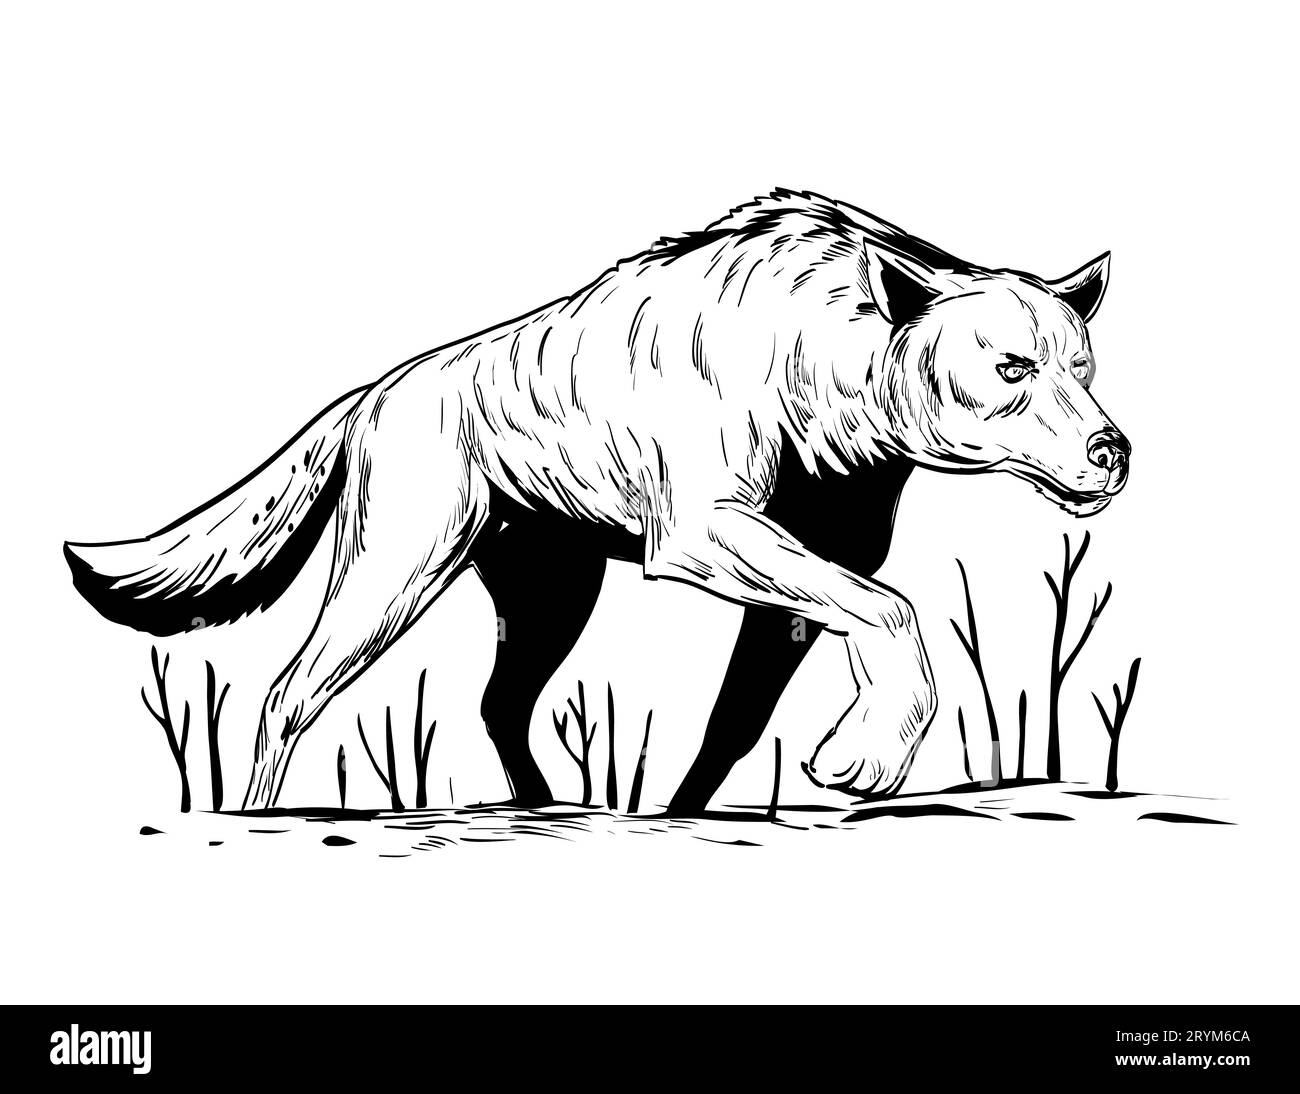 Wolf or Wild Dog Stalking During Winter Viewed from Low Angle Comics Style Drawing Stock Photo